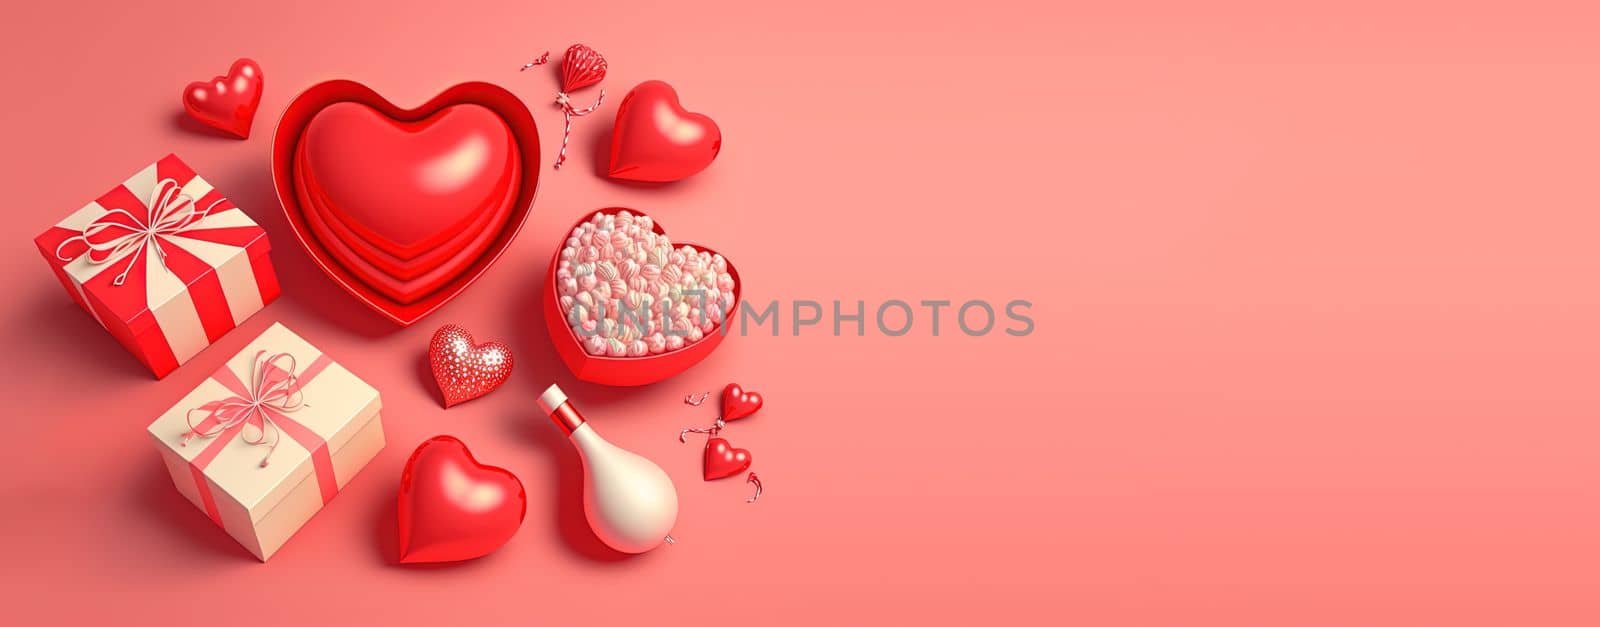 Happy Valentine's Day banner featuring a glossy red heart shape